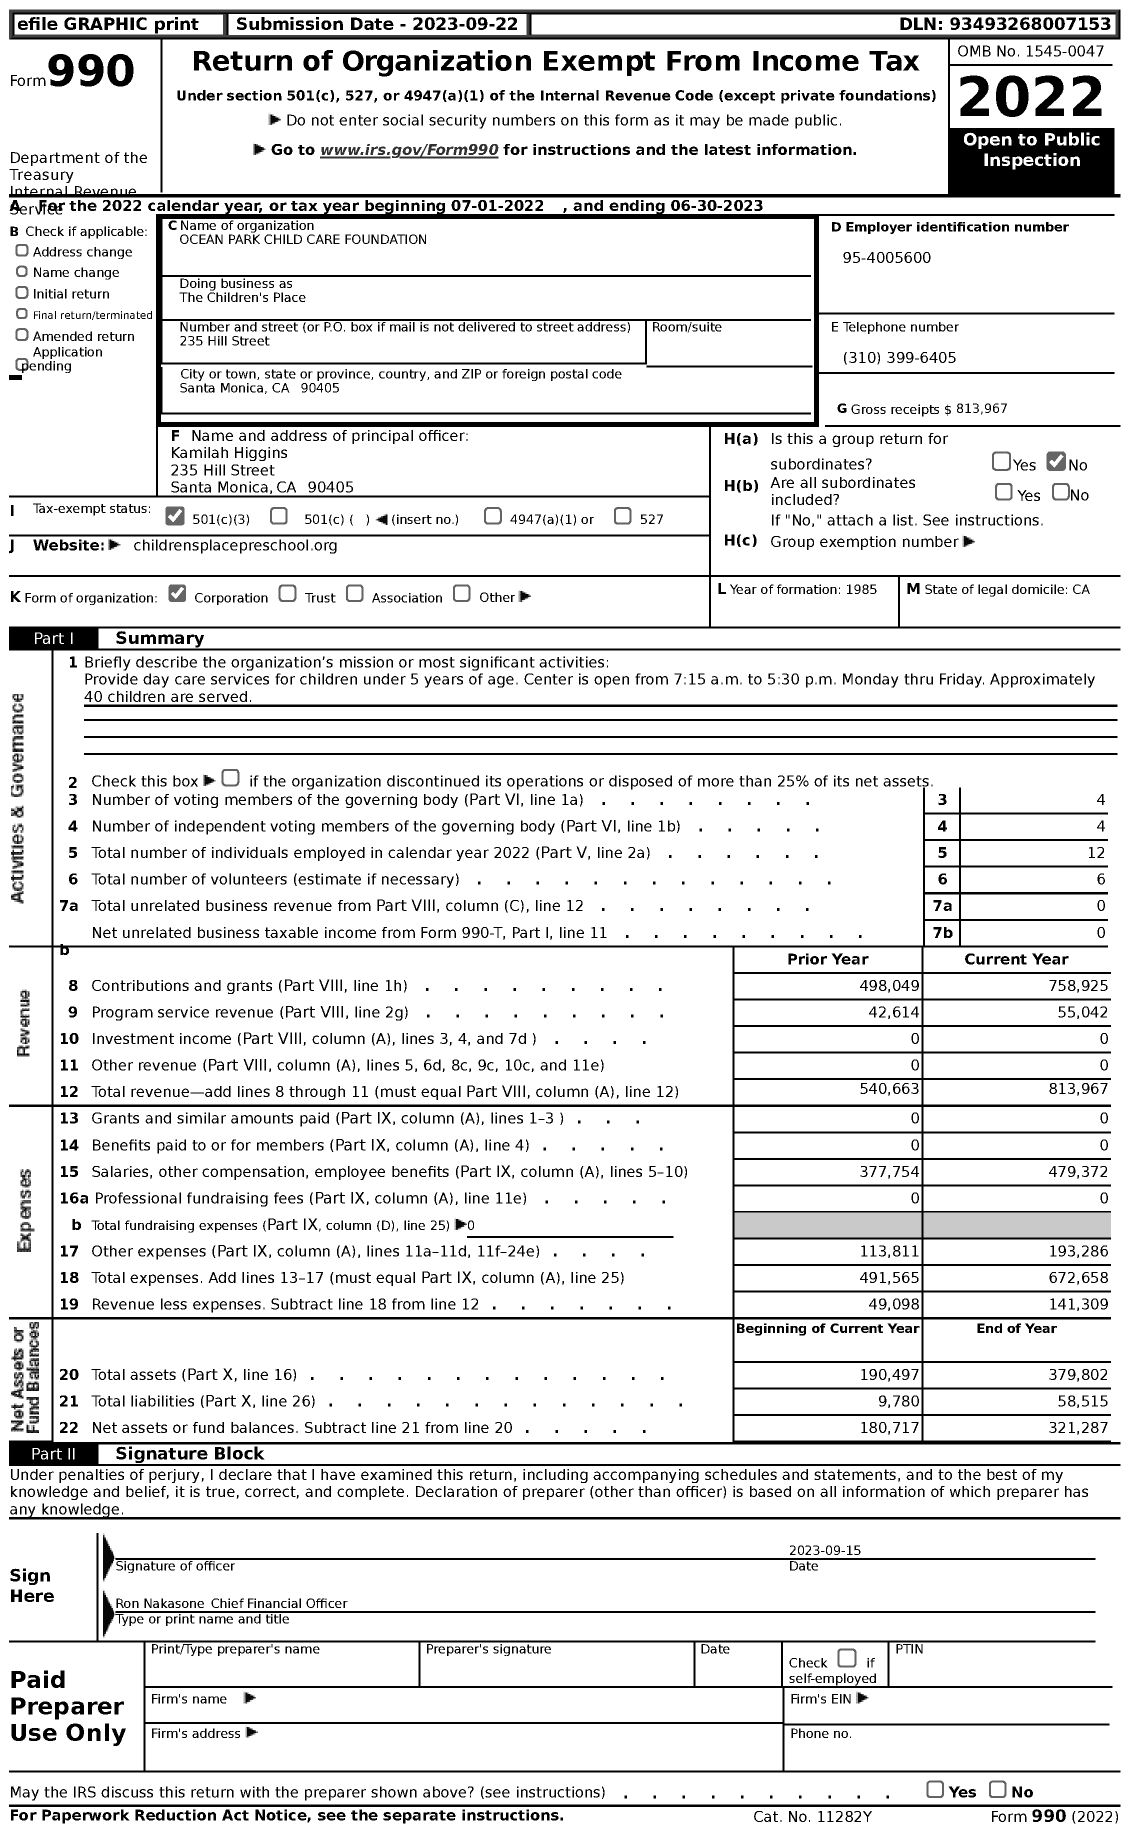 Image of first page of 2022 Form 990 for The Children's Place / Ocean Park Child Care Foundation